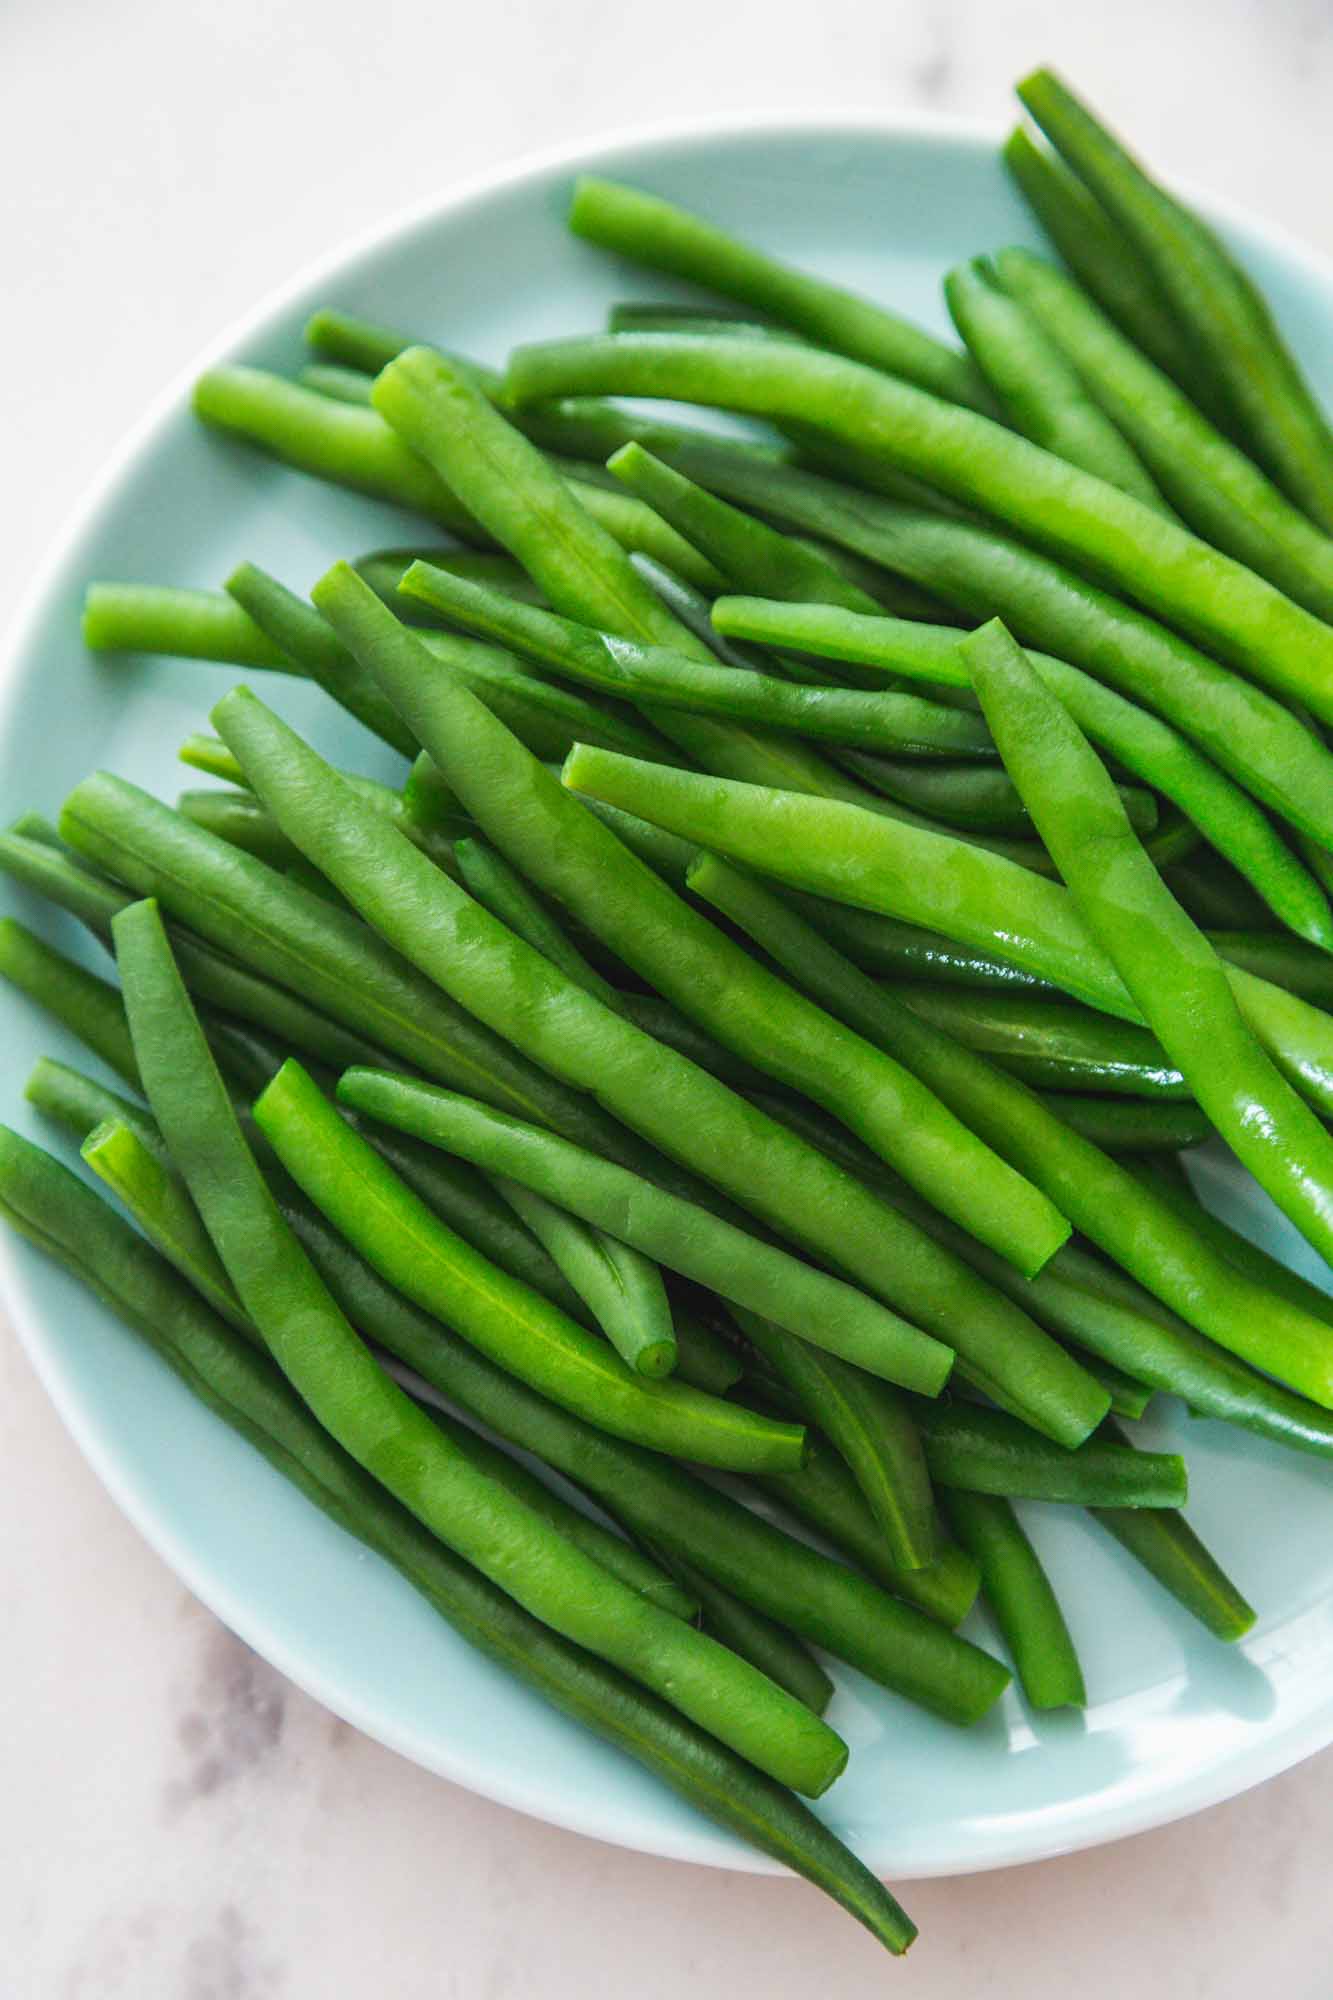 Overhead shot of blanched green beans on a blue side plate